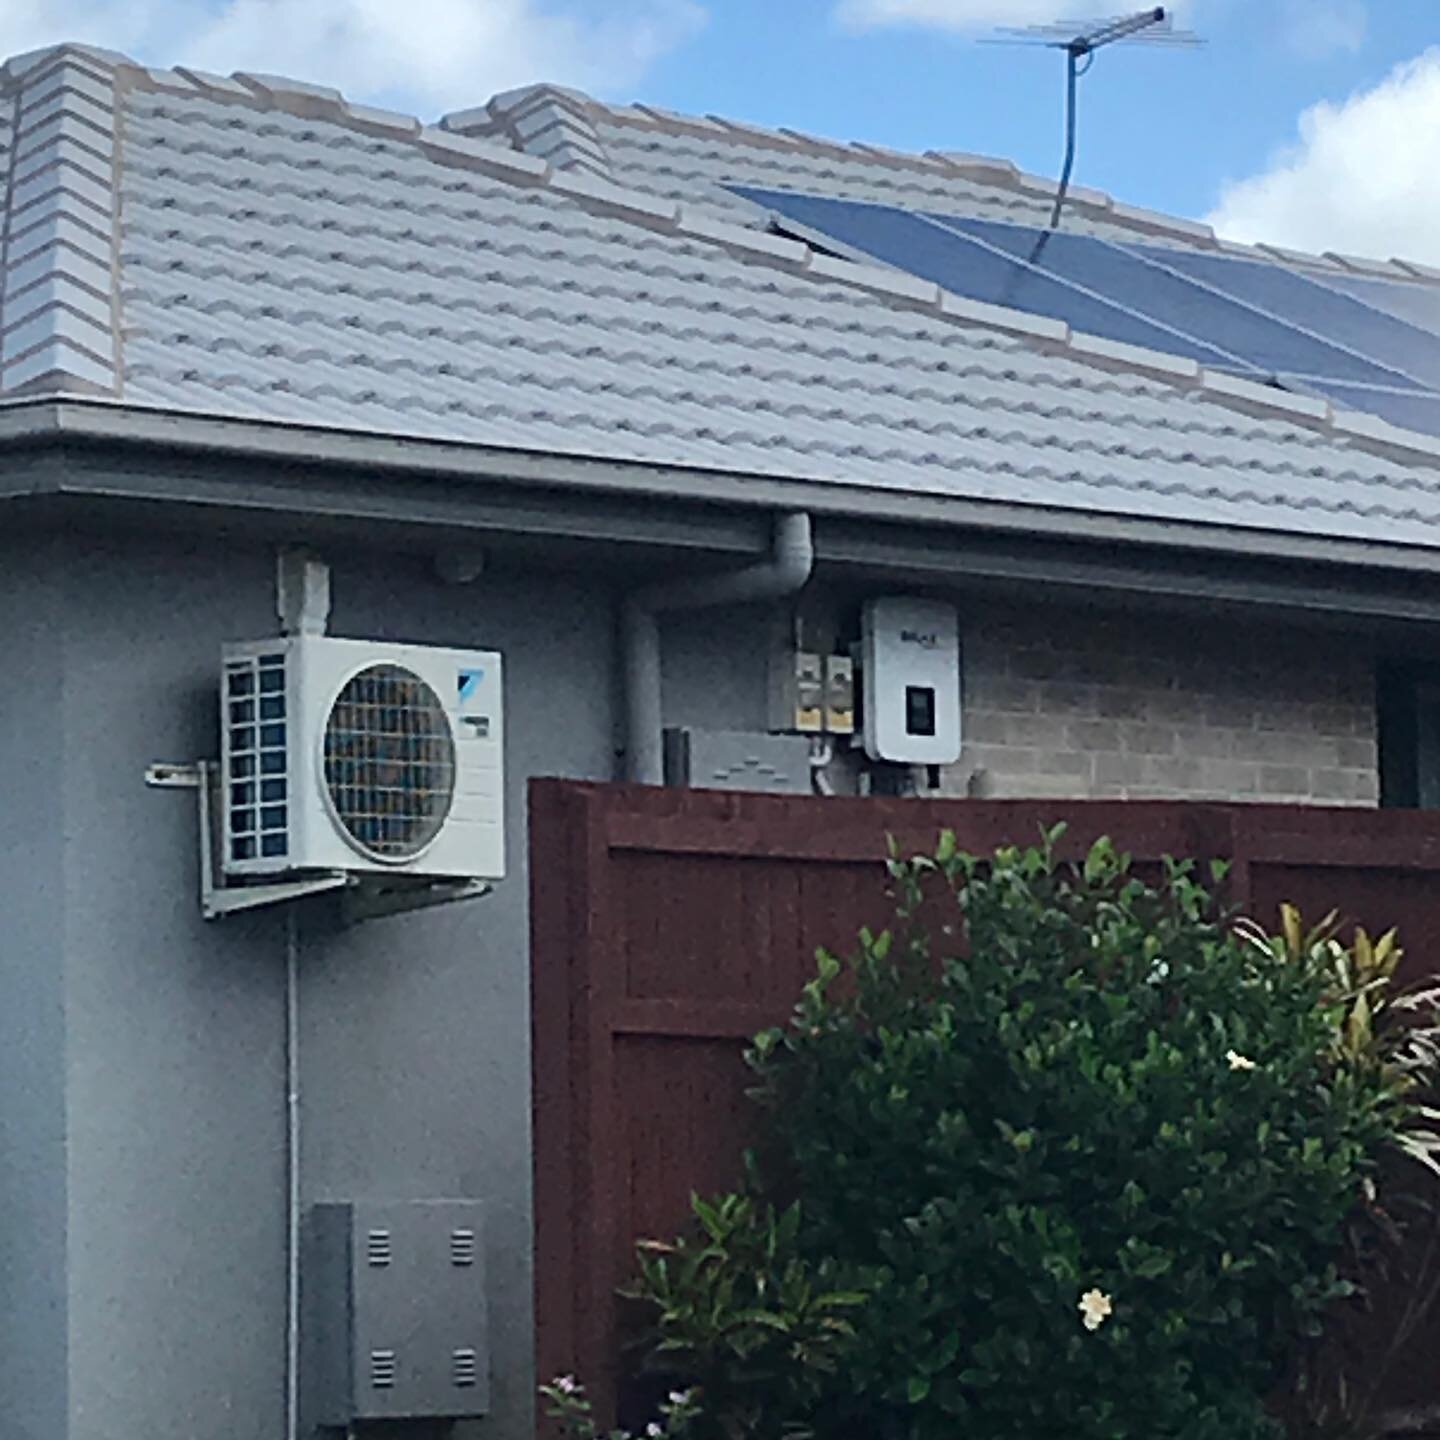 Two brand new houses next door to each other both systems under 6 months old and both inverters installed on a North facing wall !! Why ?? 

Cheep solar companies using subcontractors to install that don&rsquo;t care about the longevity of the system